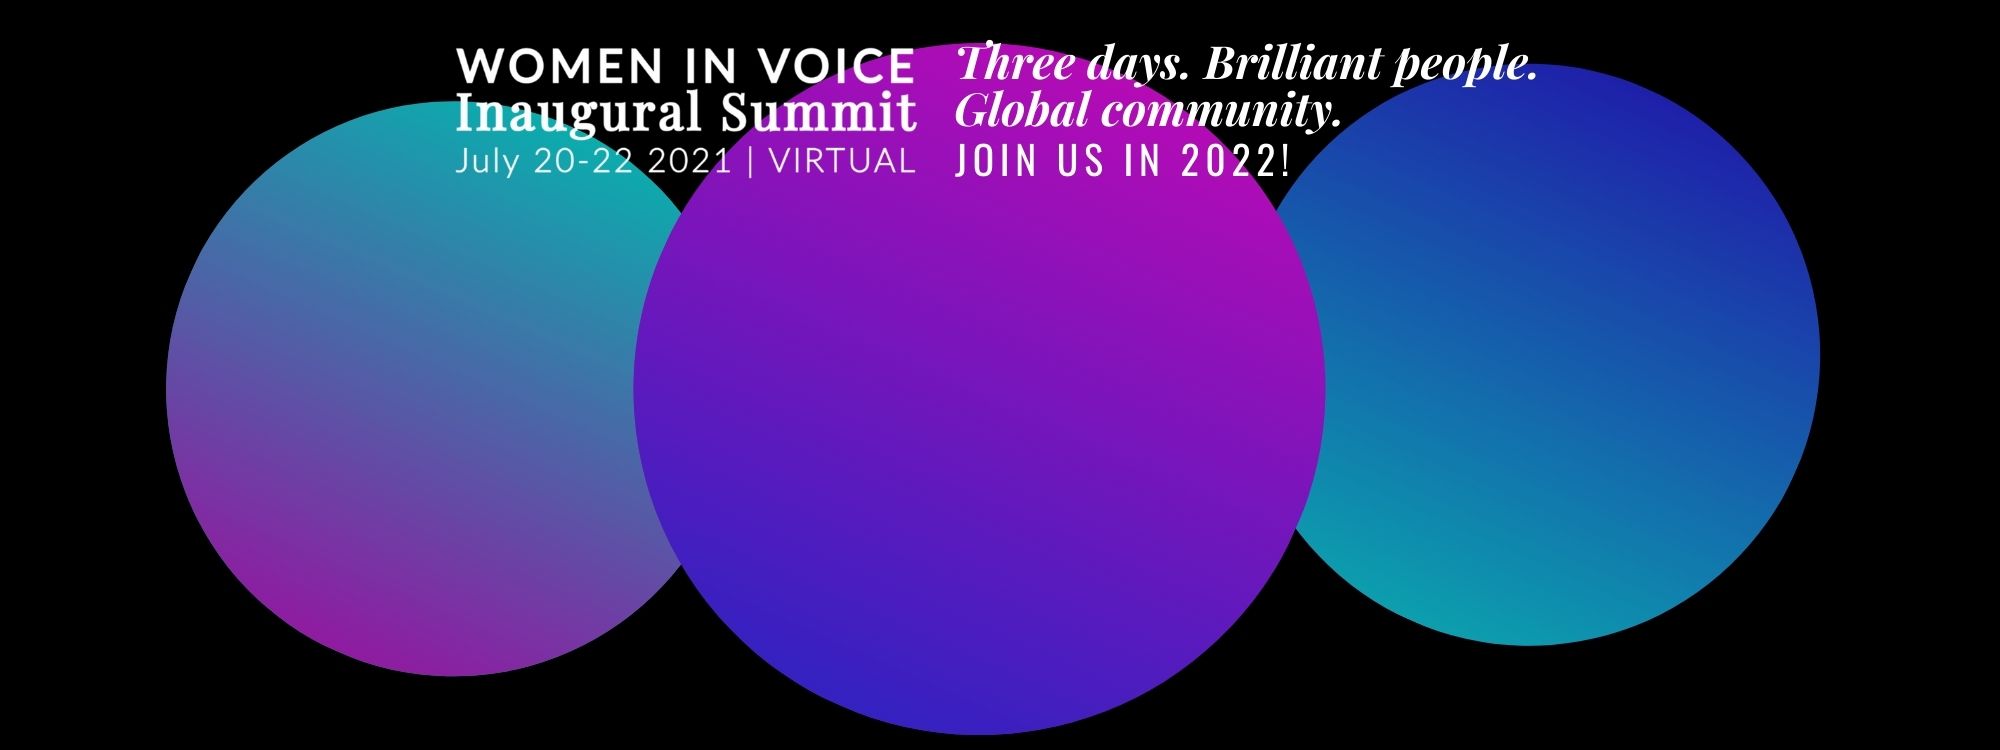 Women in Voice Inaugural Summit: July 20-22 | Virtual. Three Days. Brilliant people. Global community. Join us in 2022!